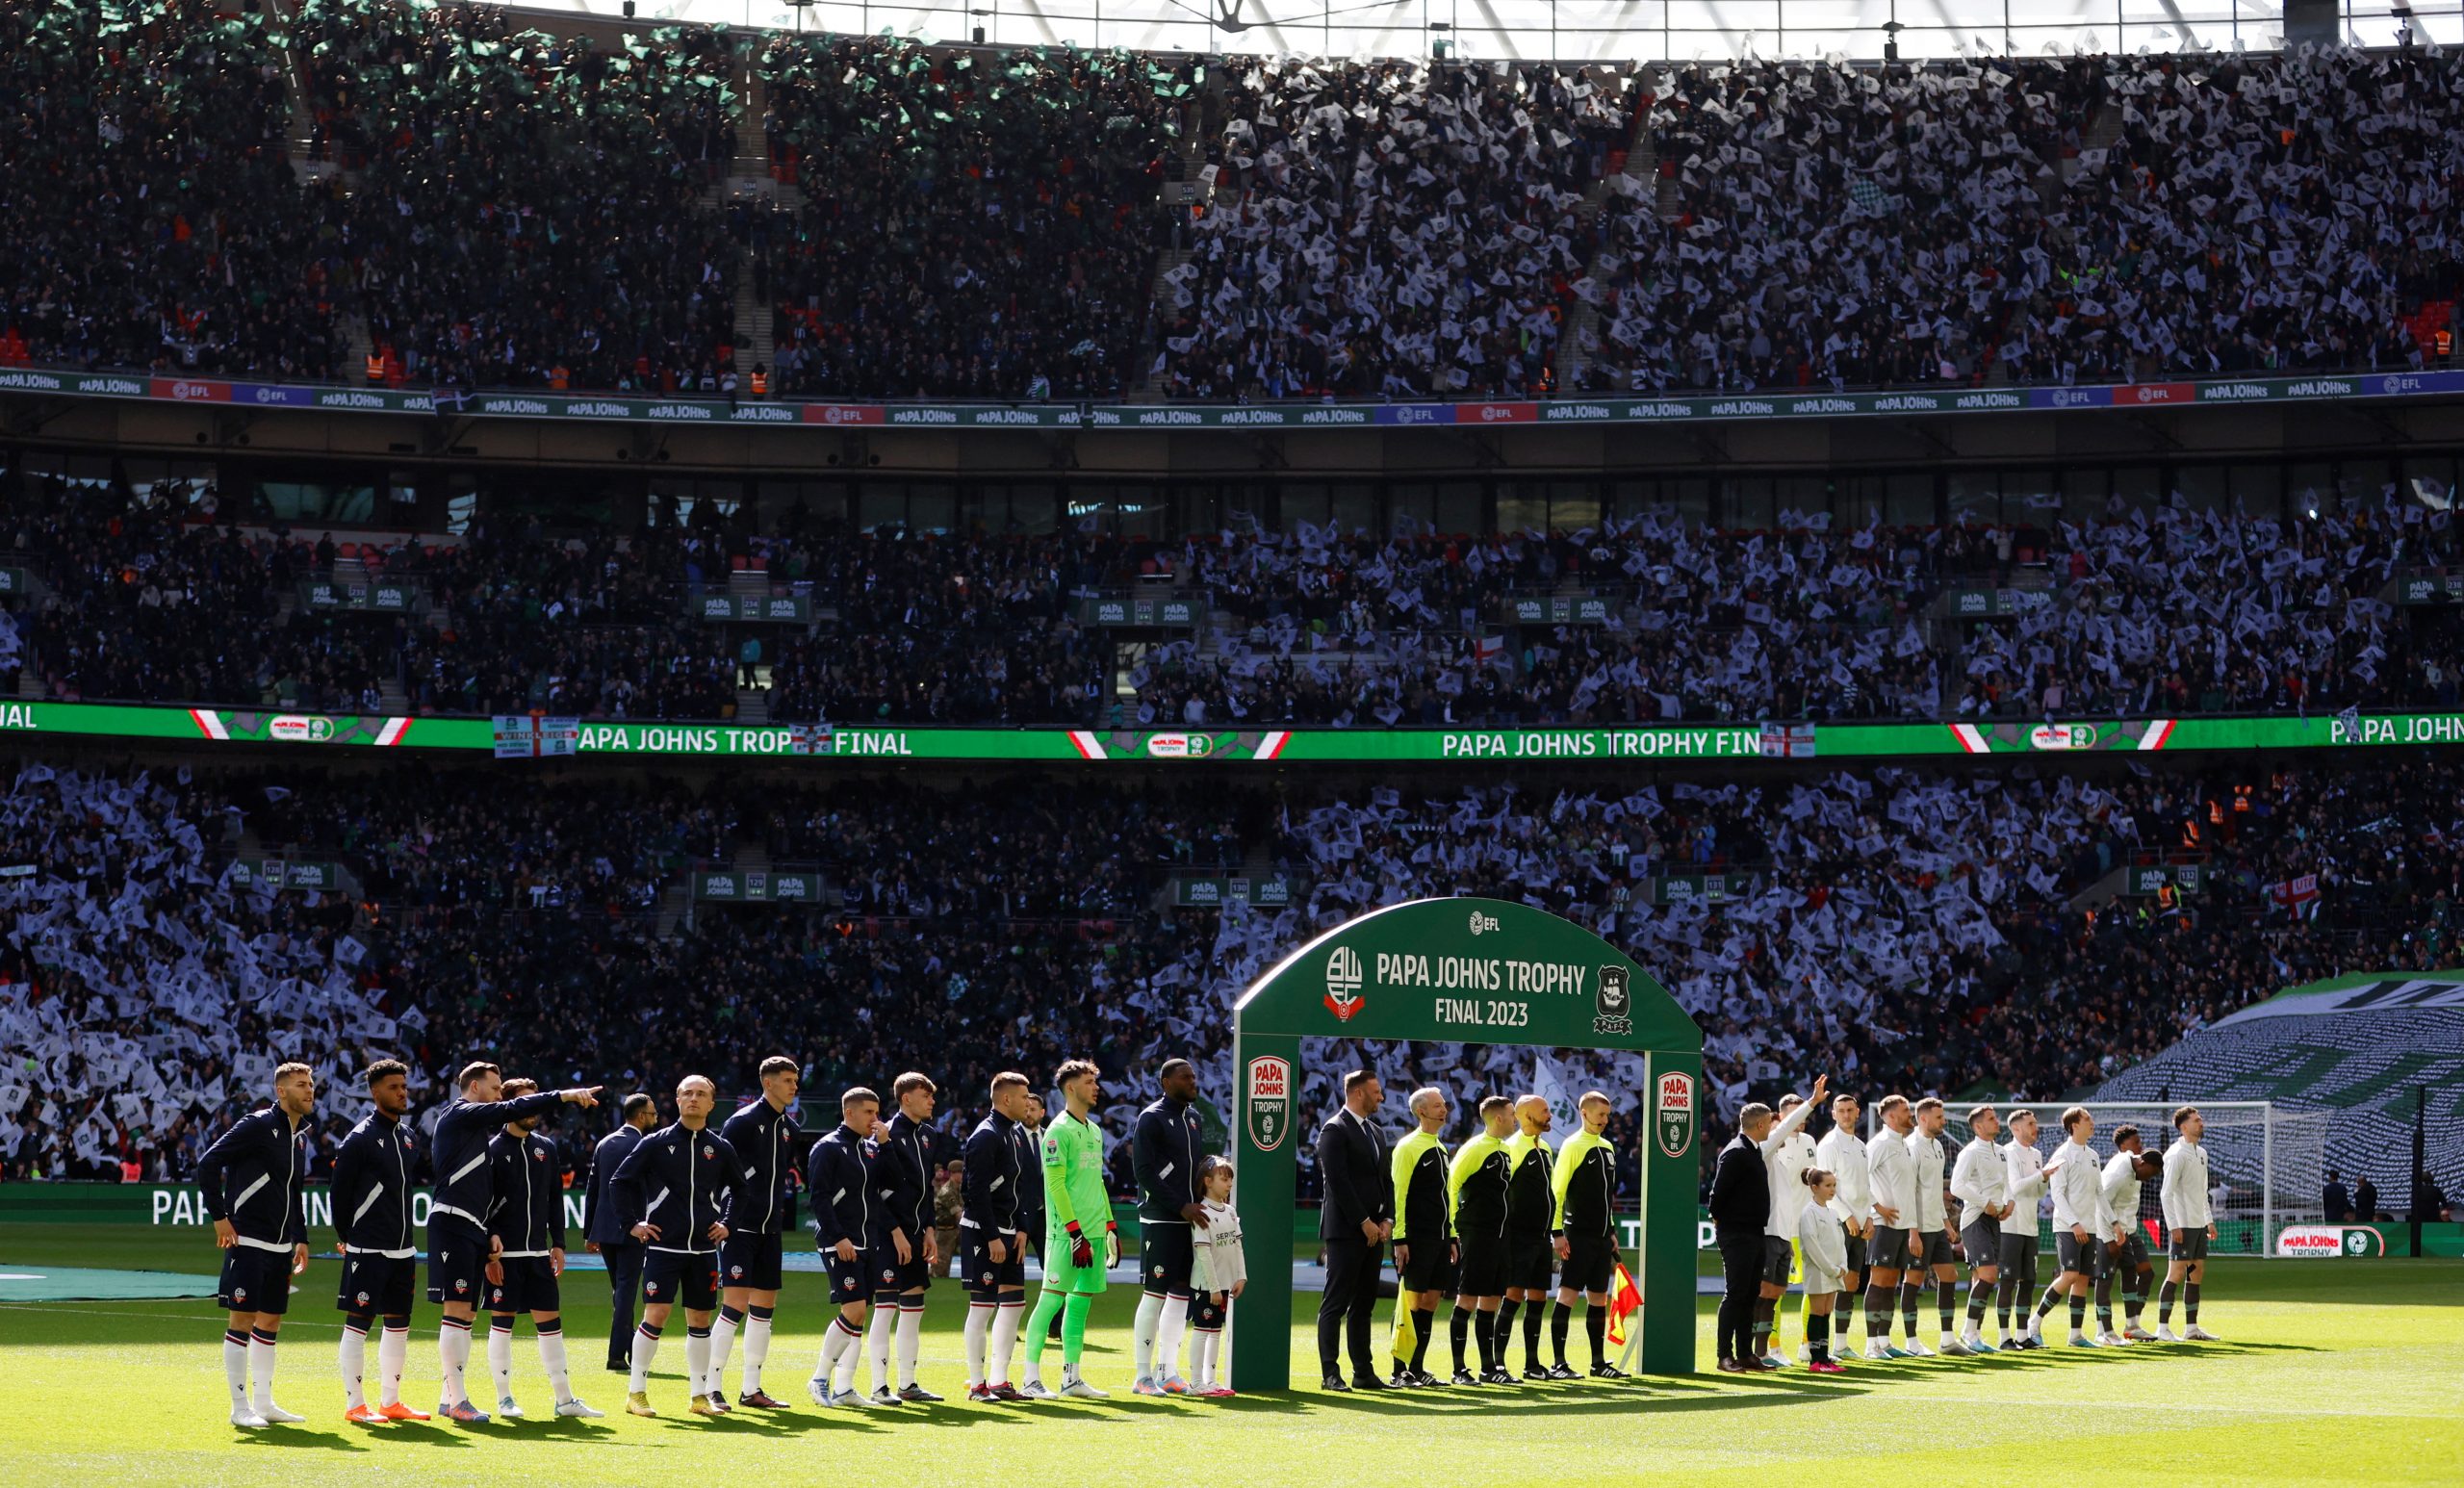 Soccer Football - EFL Trophy Final - Bolton Wanderers v Plymouth Argyle - Wembley Stadium, London, Britain - April 2, 2023 General view as the teams line up before the match    Action Images/Peter Cziborra  EDITORIAL USE ONLY. No use with unauthorized audio, video, data, fixture lists, club/league logos or "live" services. Online in-match use limited to 75 images, no video emulation. No use in betting, games or single club/league/player publications.  Please contact your account representative for further details.